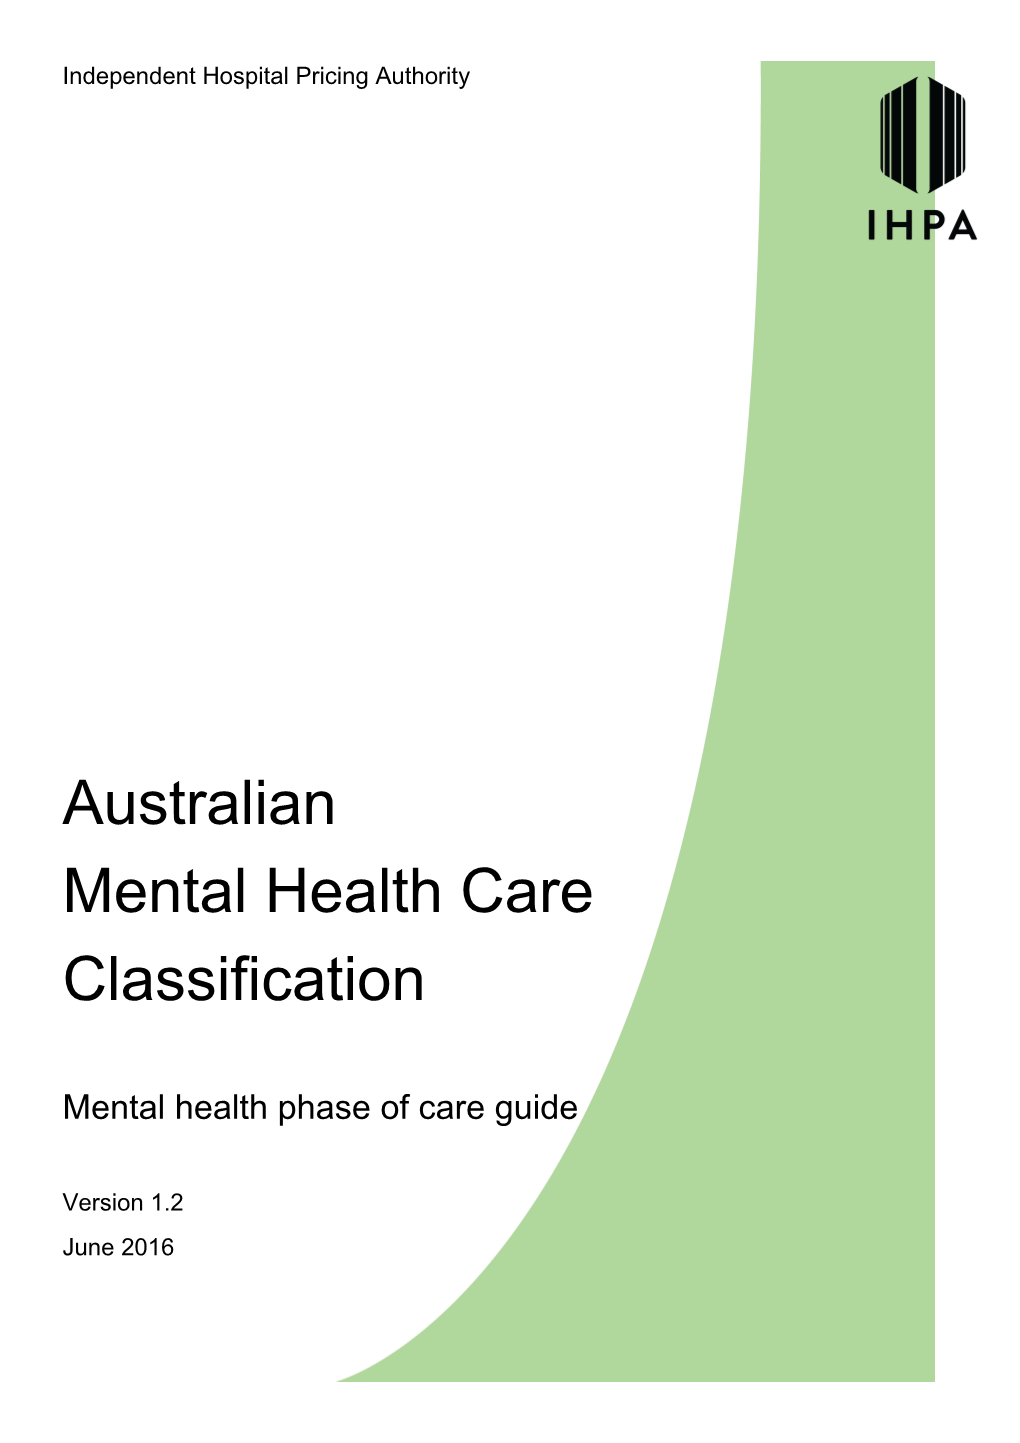 Mental Health Phase of Care Guide